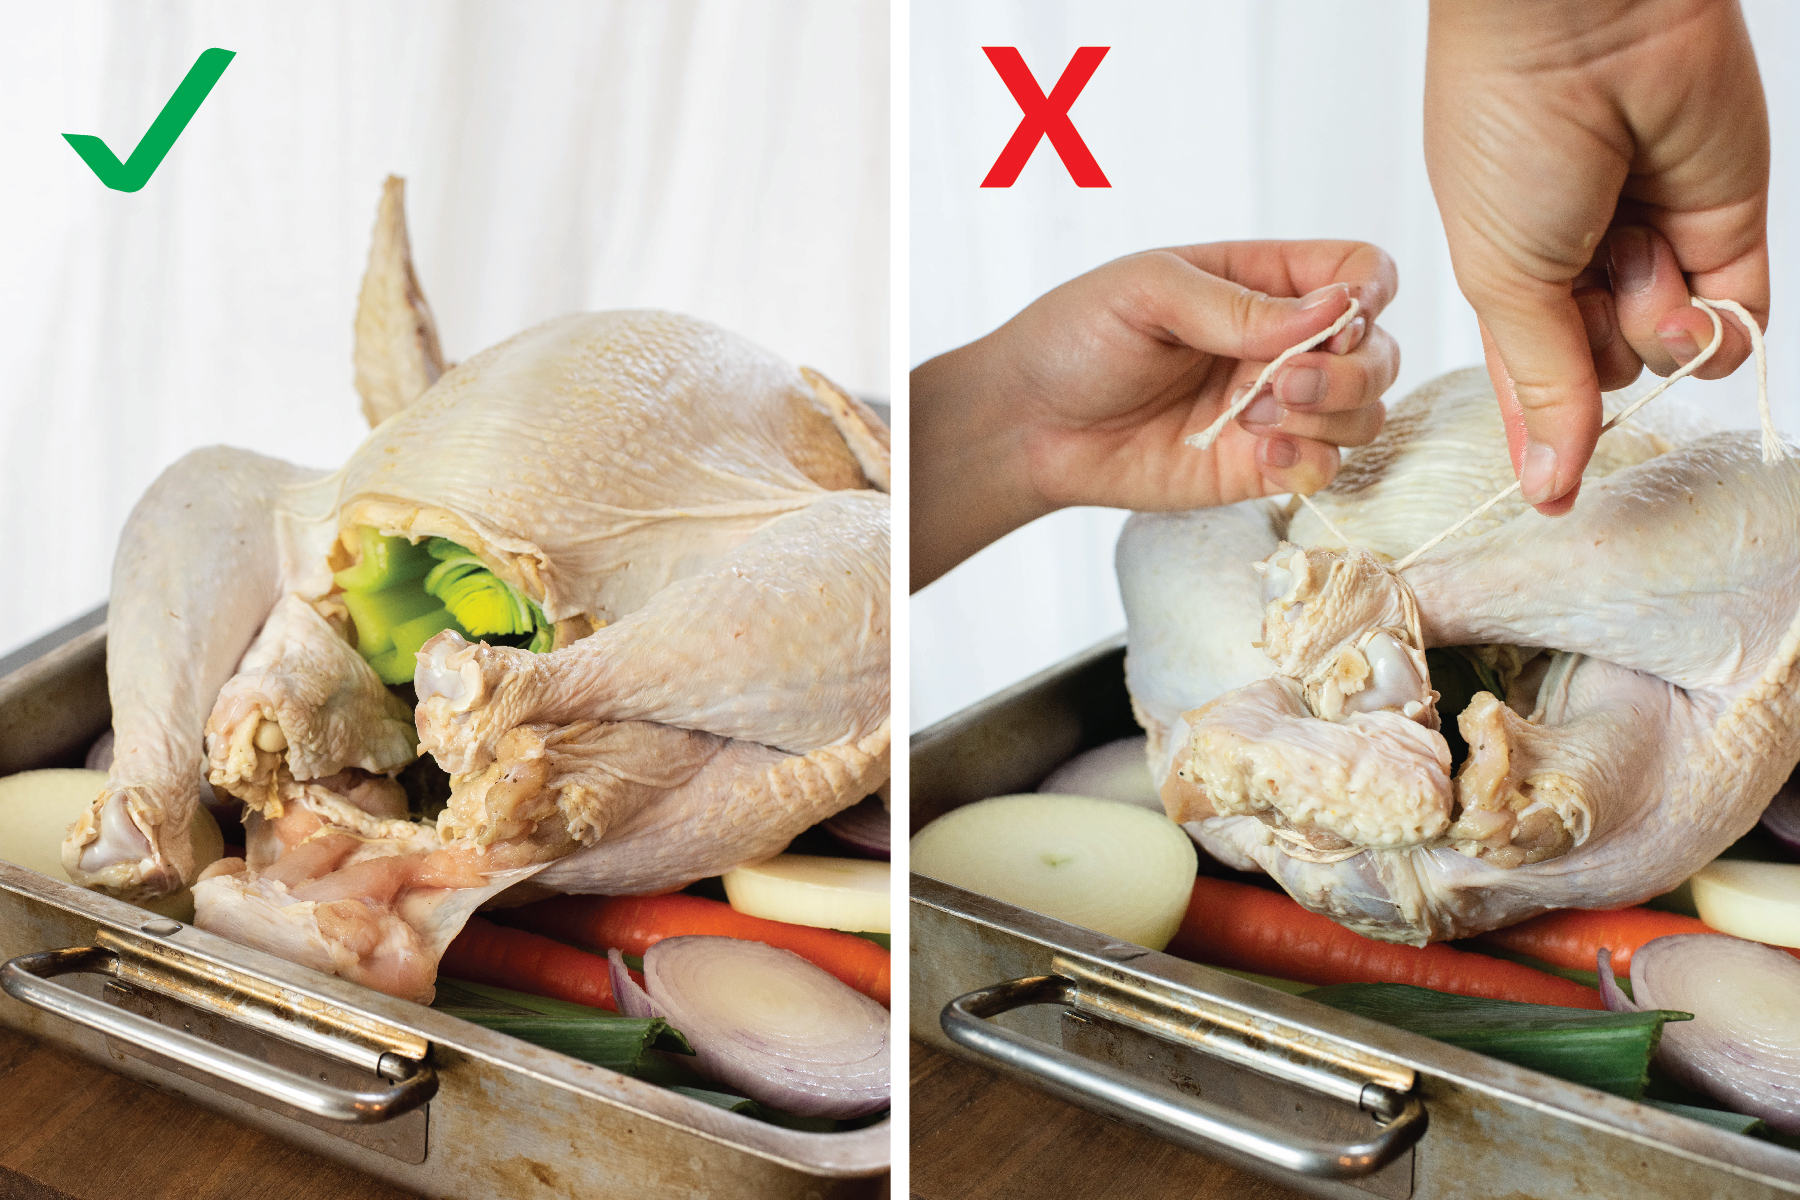 How to Put Thermometer in Turkey Correctly